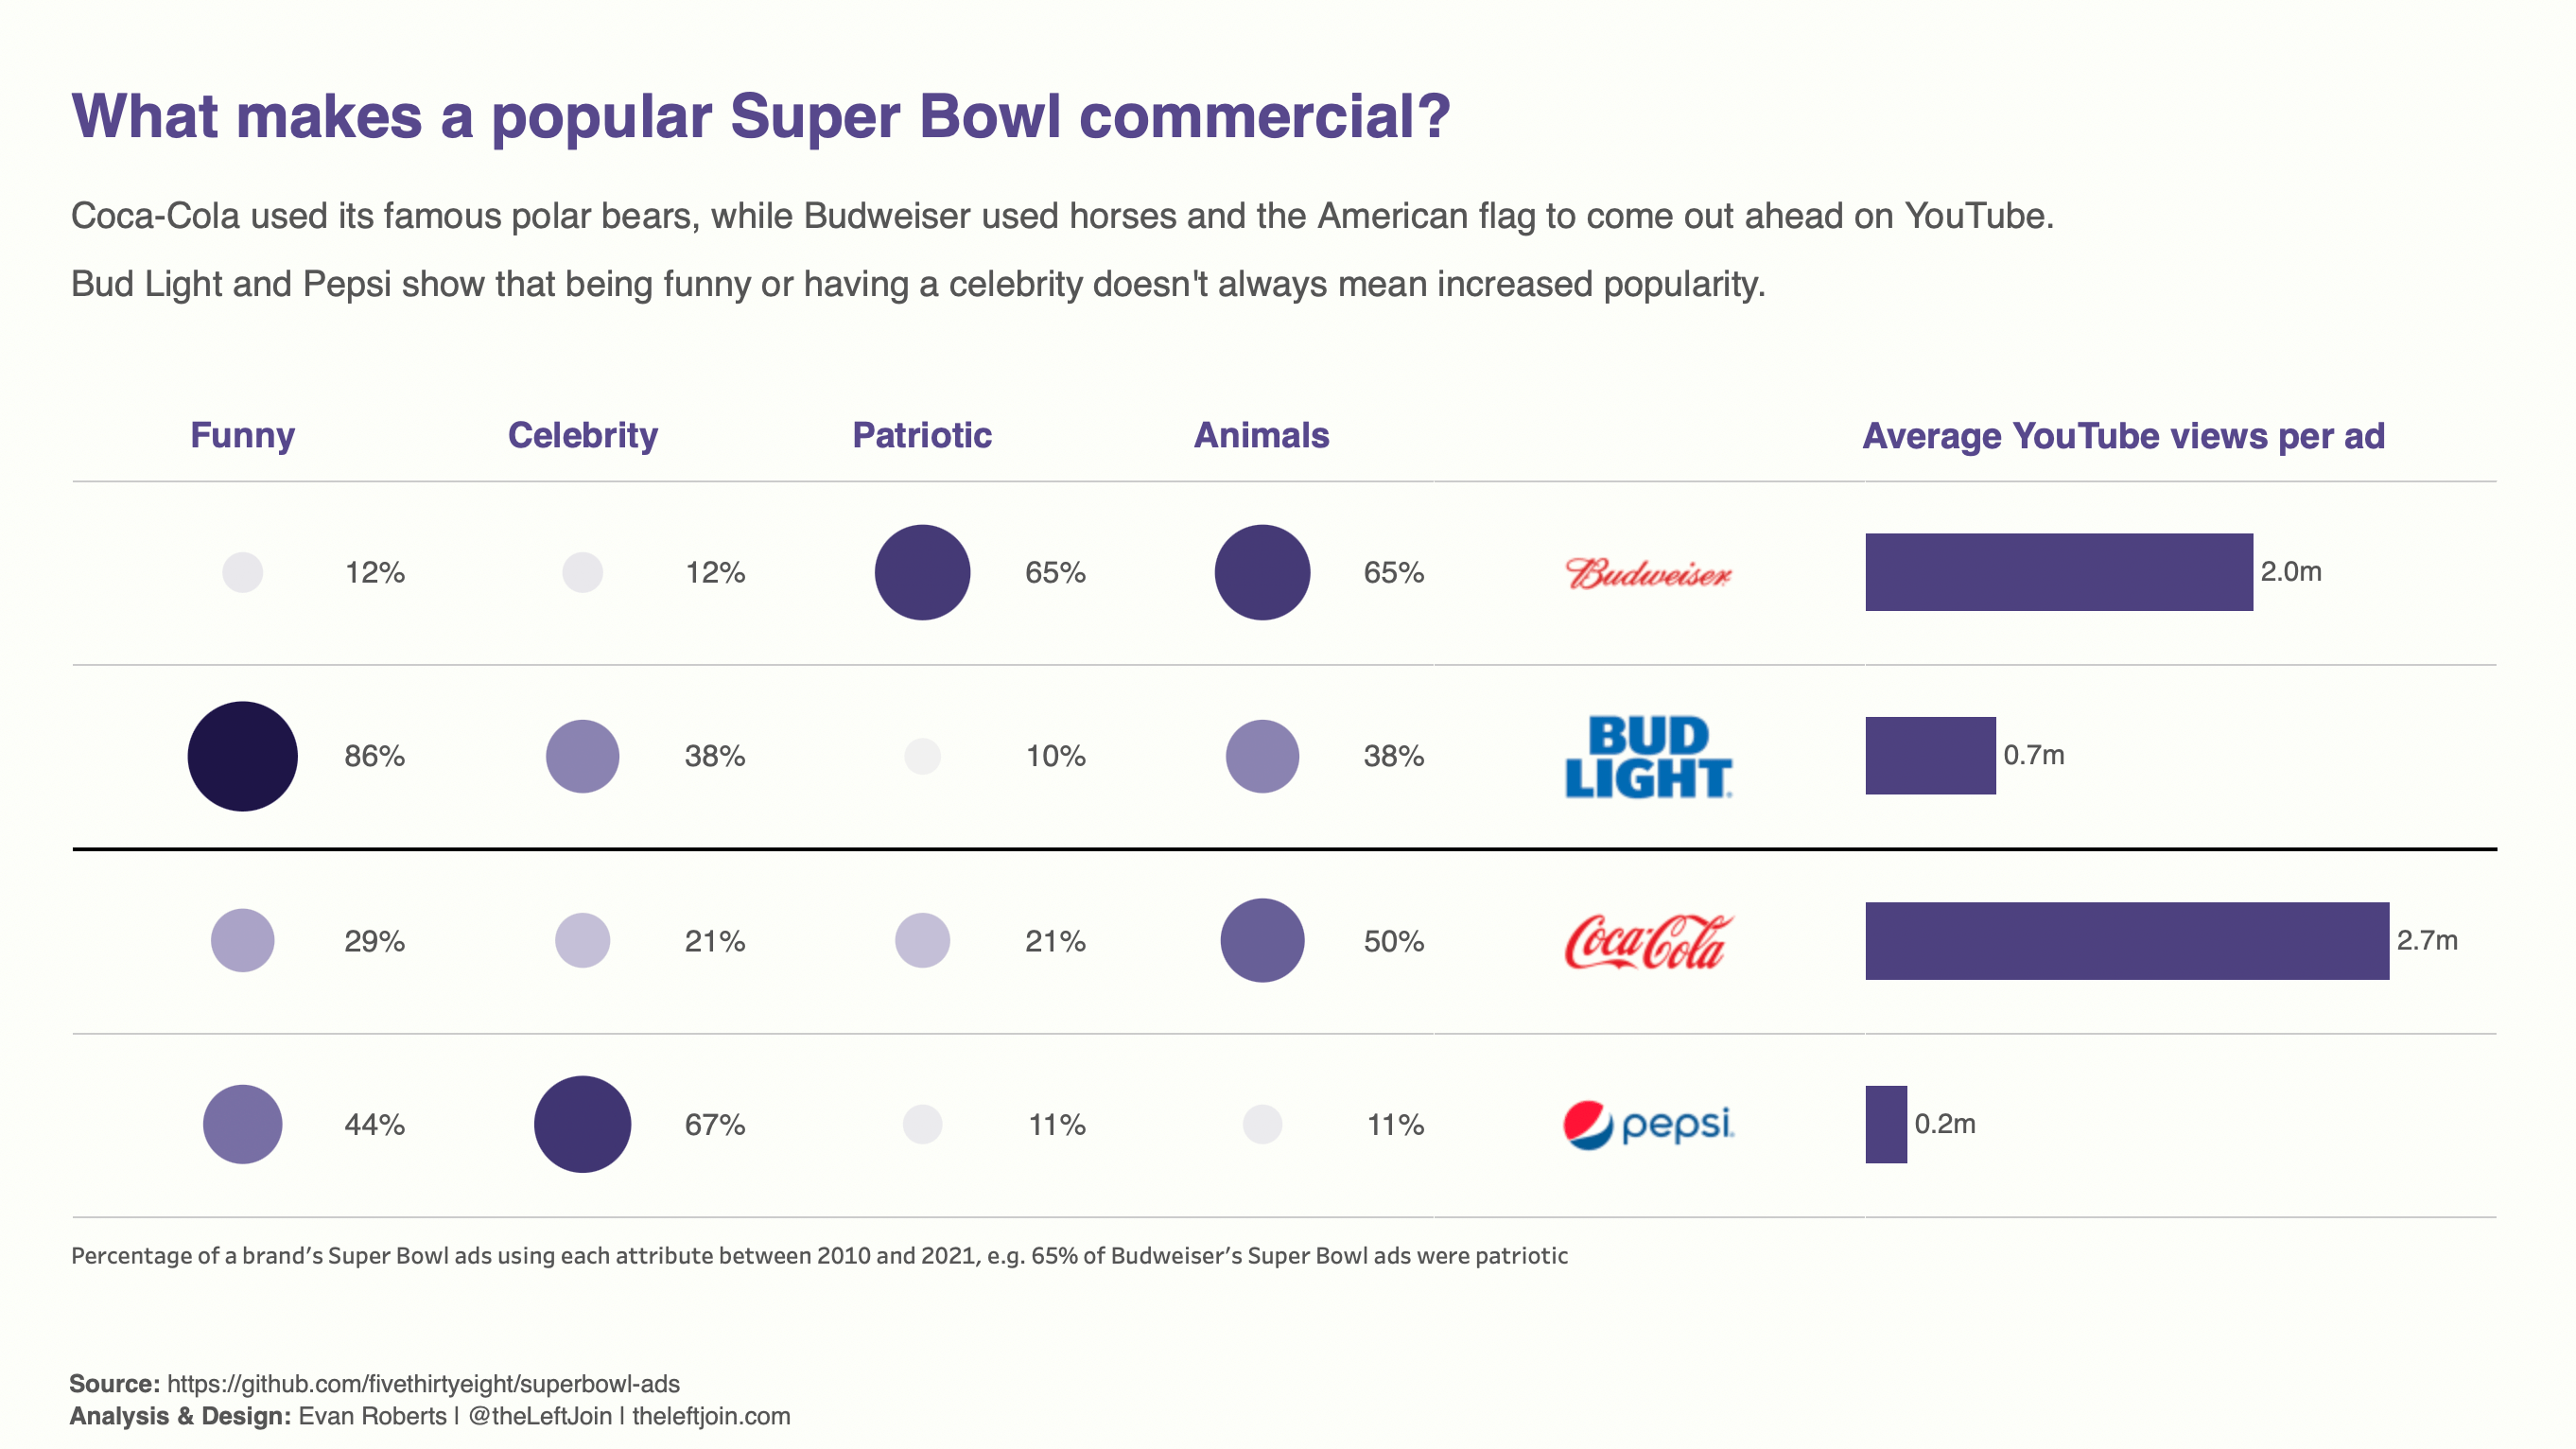 Attributes used by top brands in their Super Bowl ads